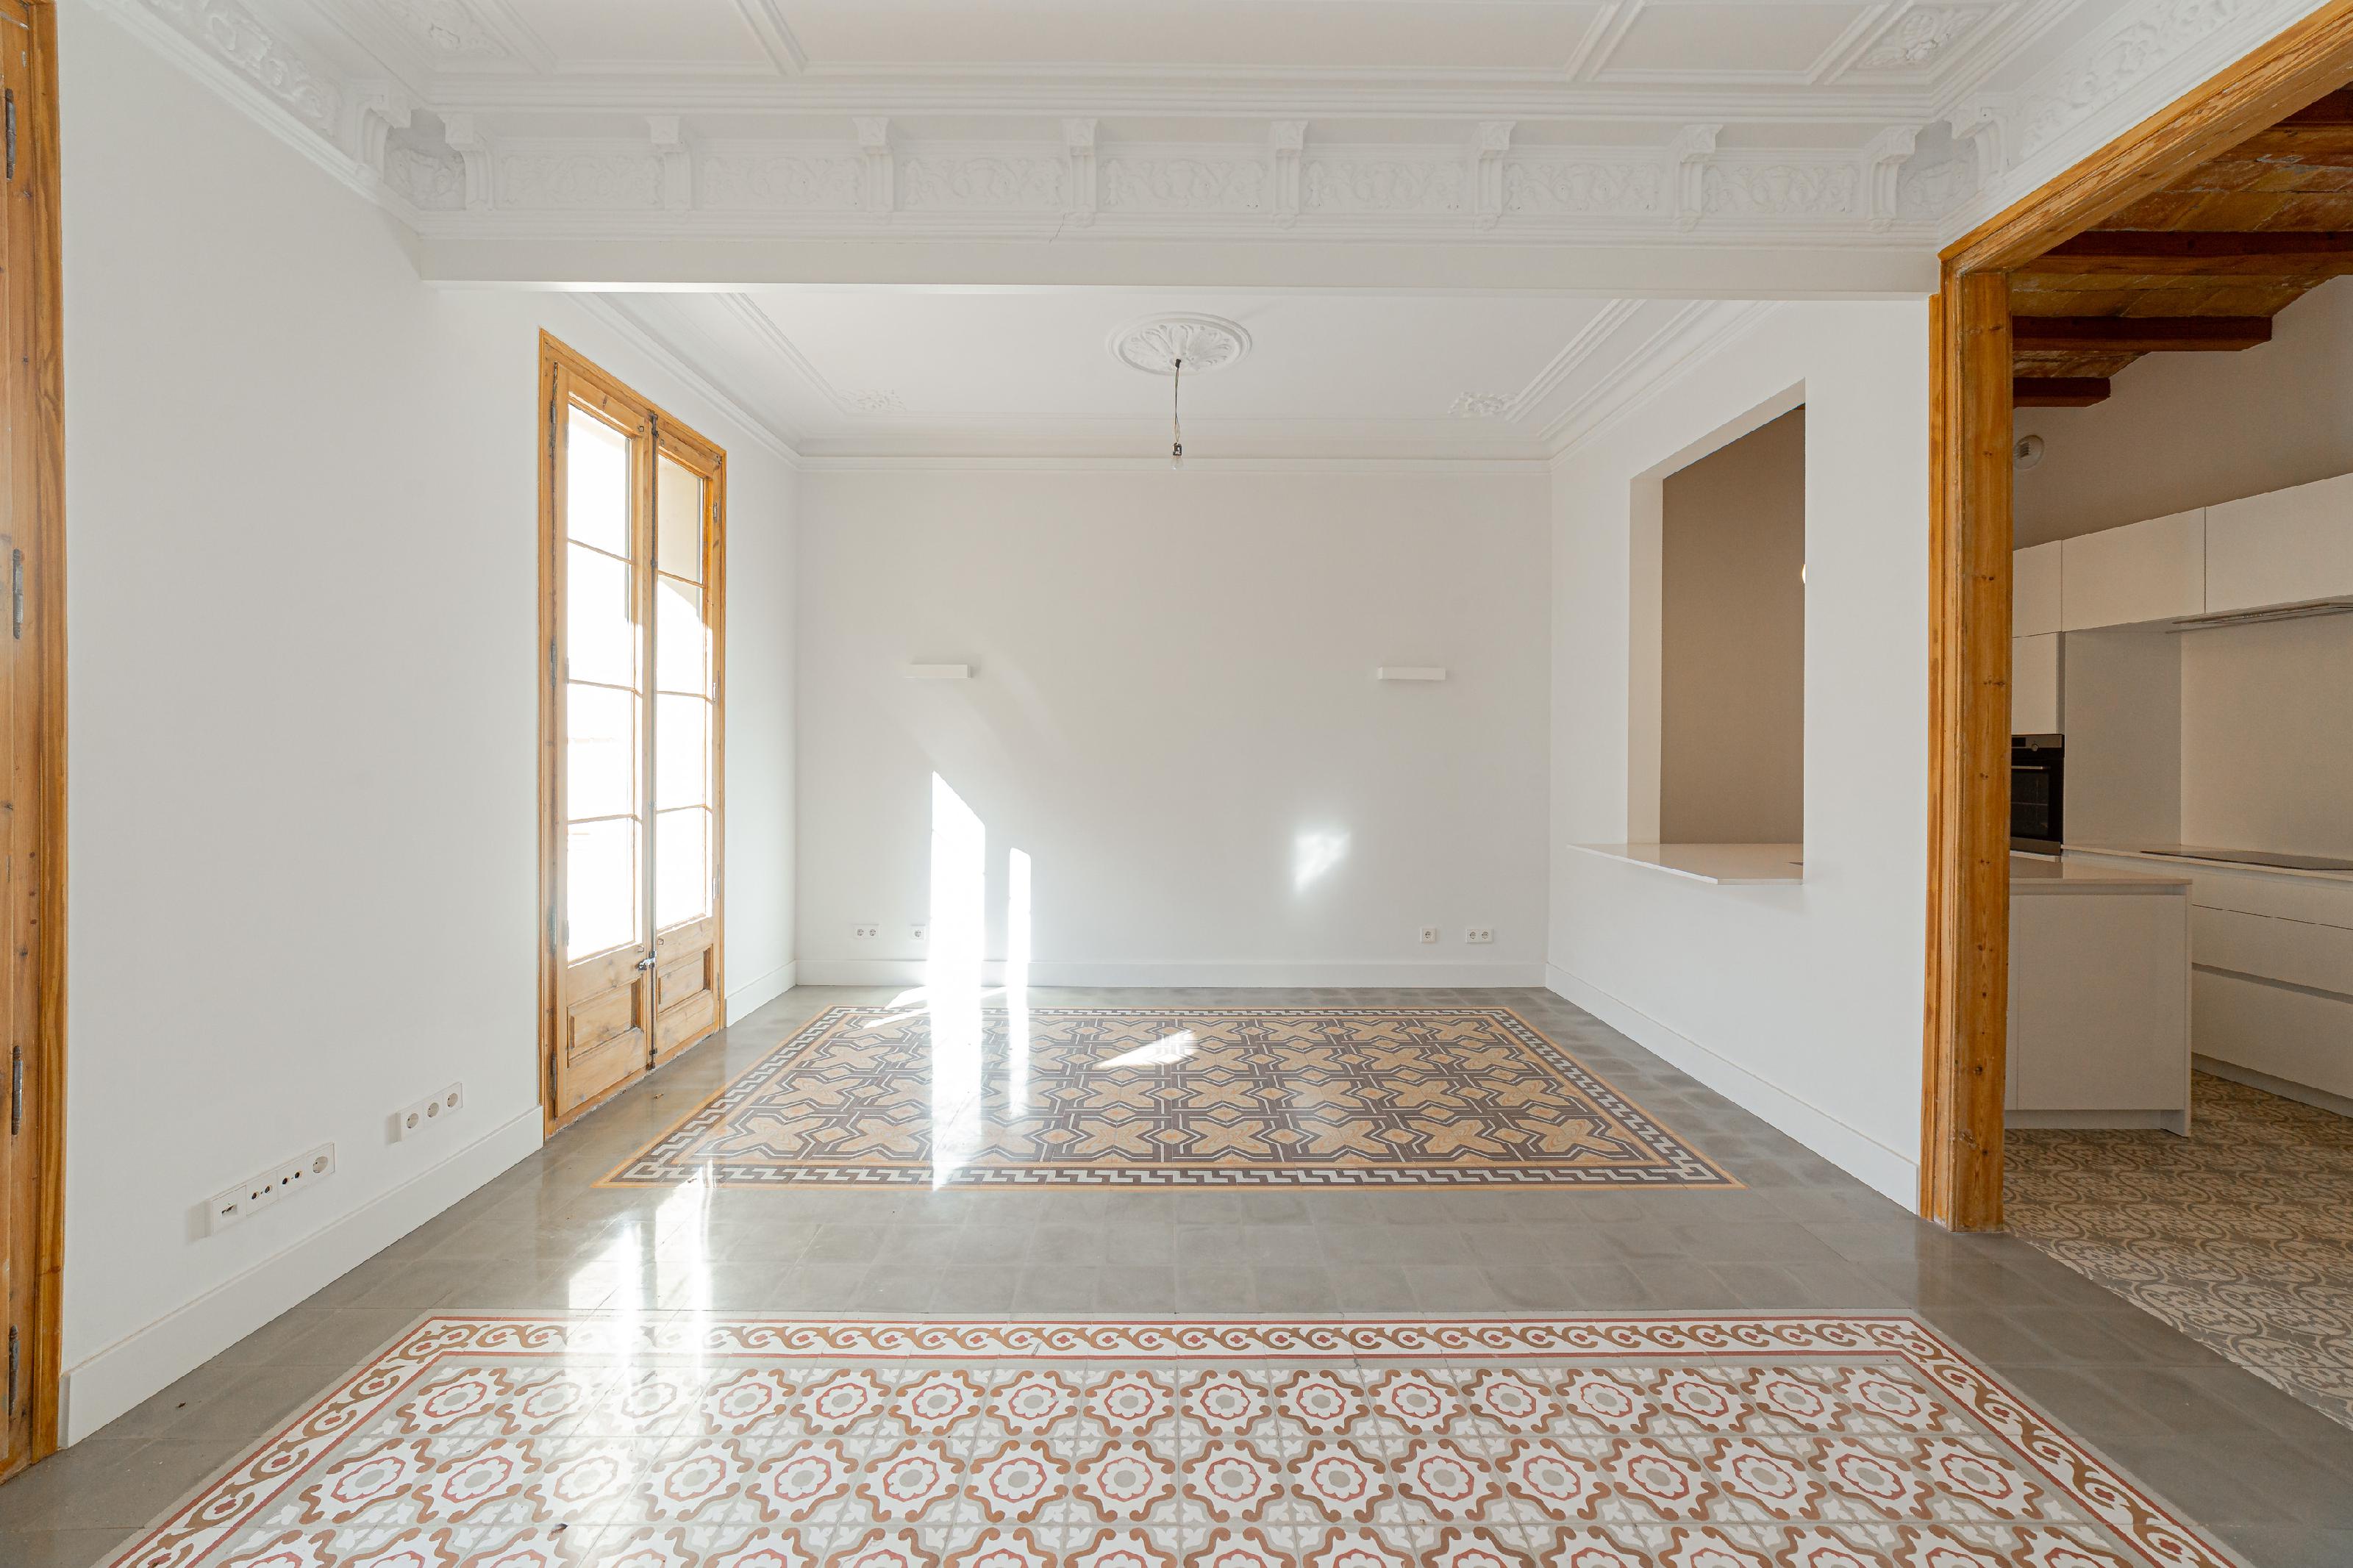 275557 Flat for sale in Eixample, Old Esquerre Eixample 5